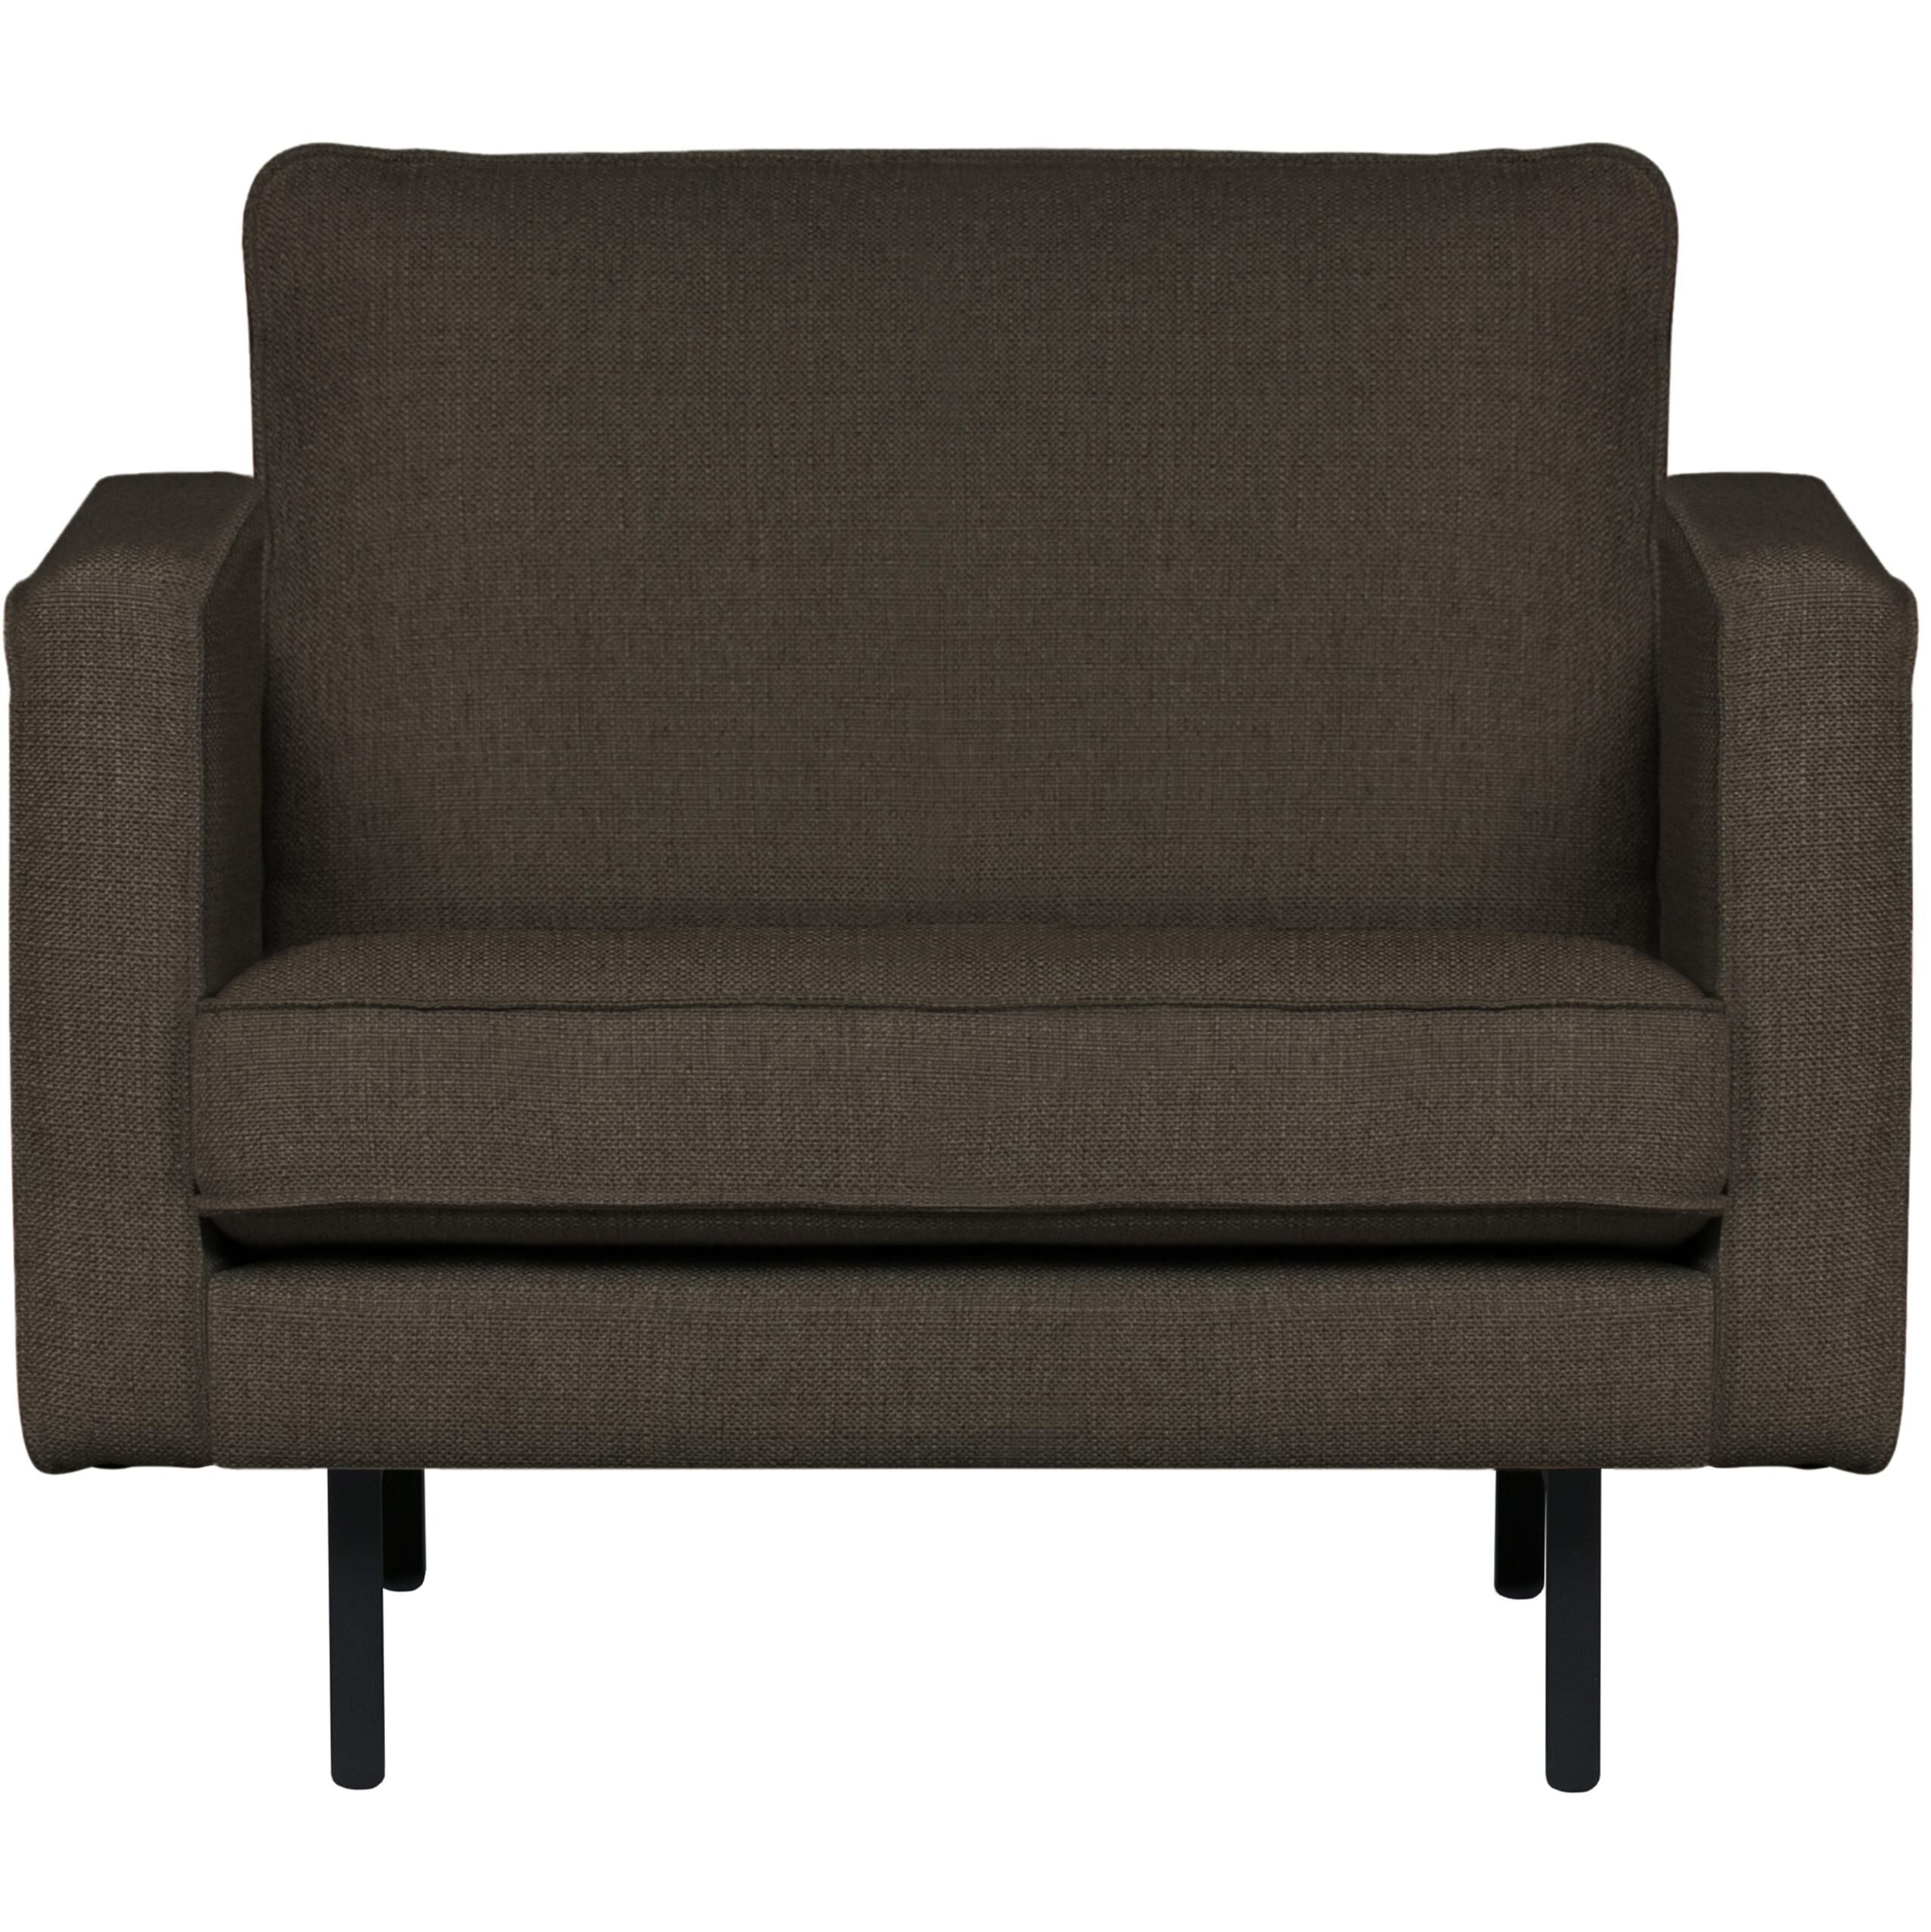 BePureHome Rodeo Stretched Fauteuil grey/brown